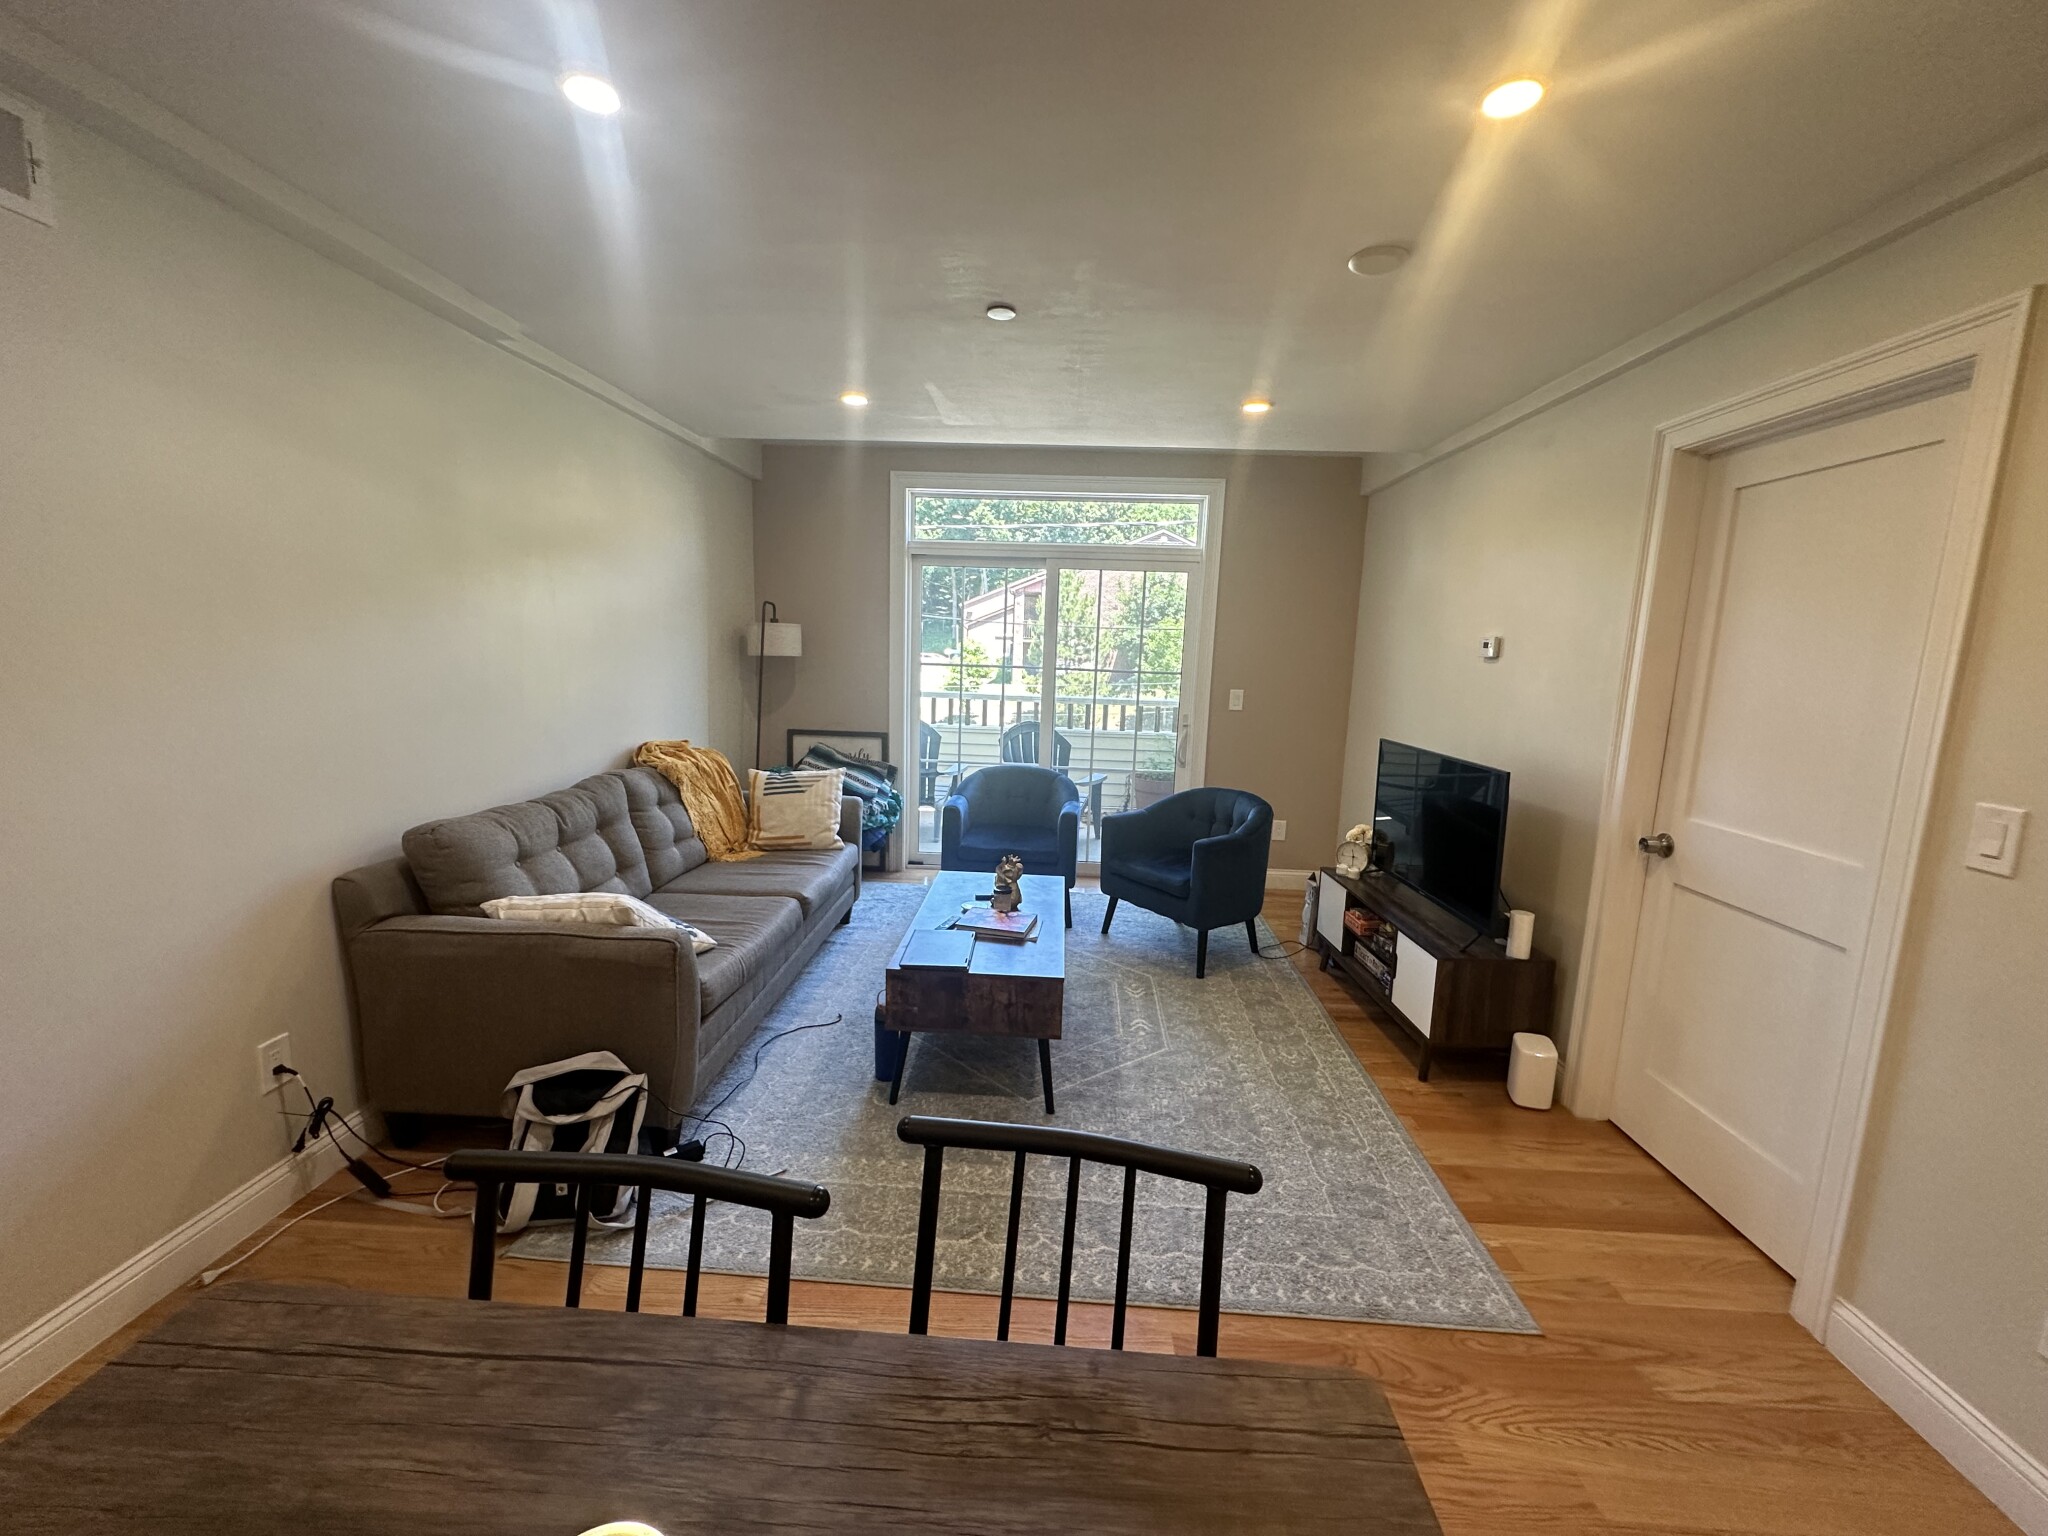 Photos of apartment on Oxford Ave.,Belmont MA 02478